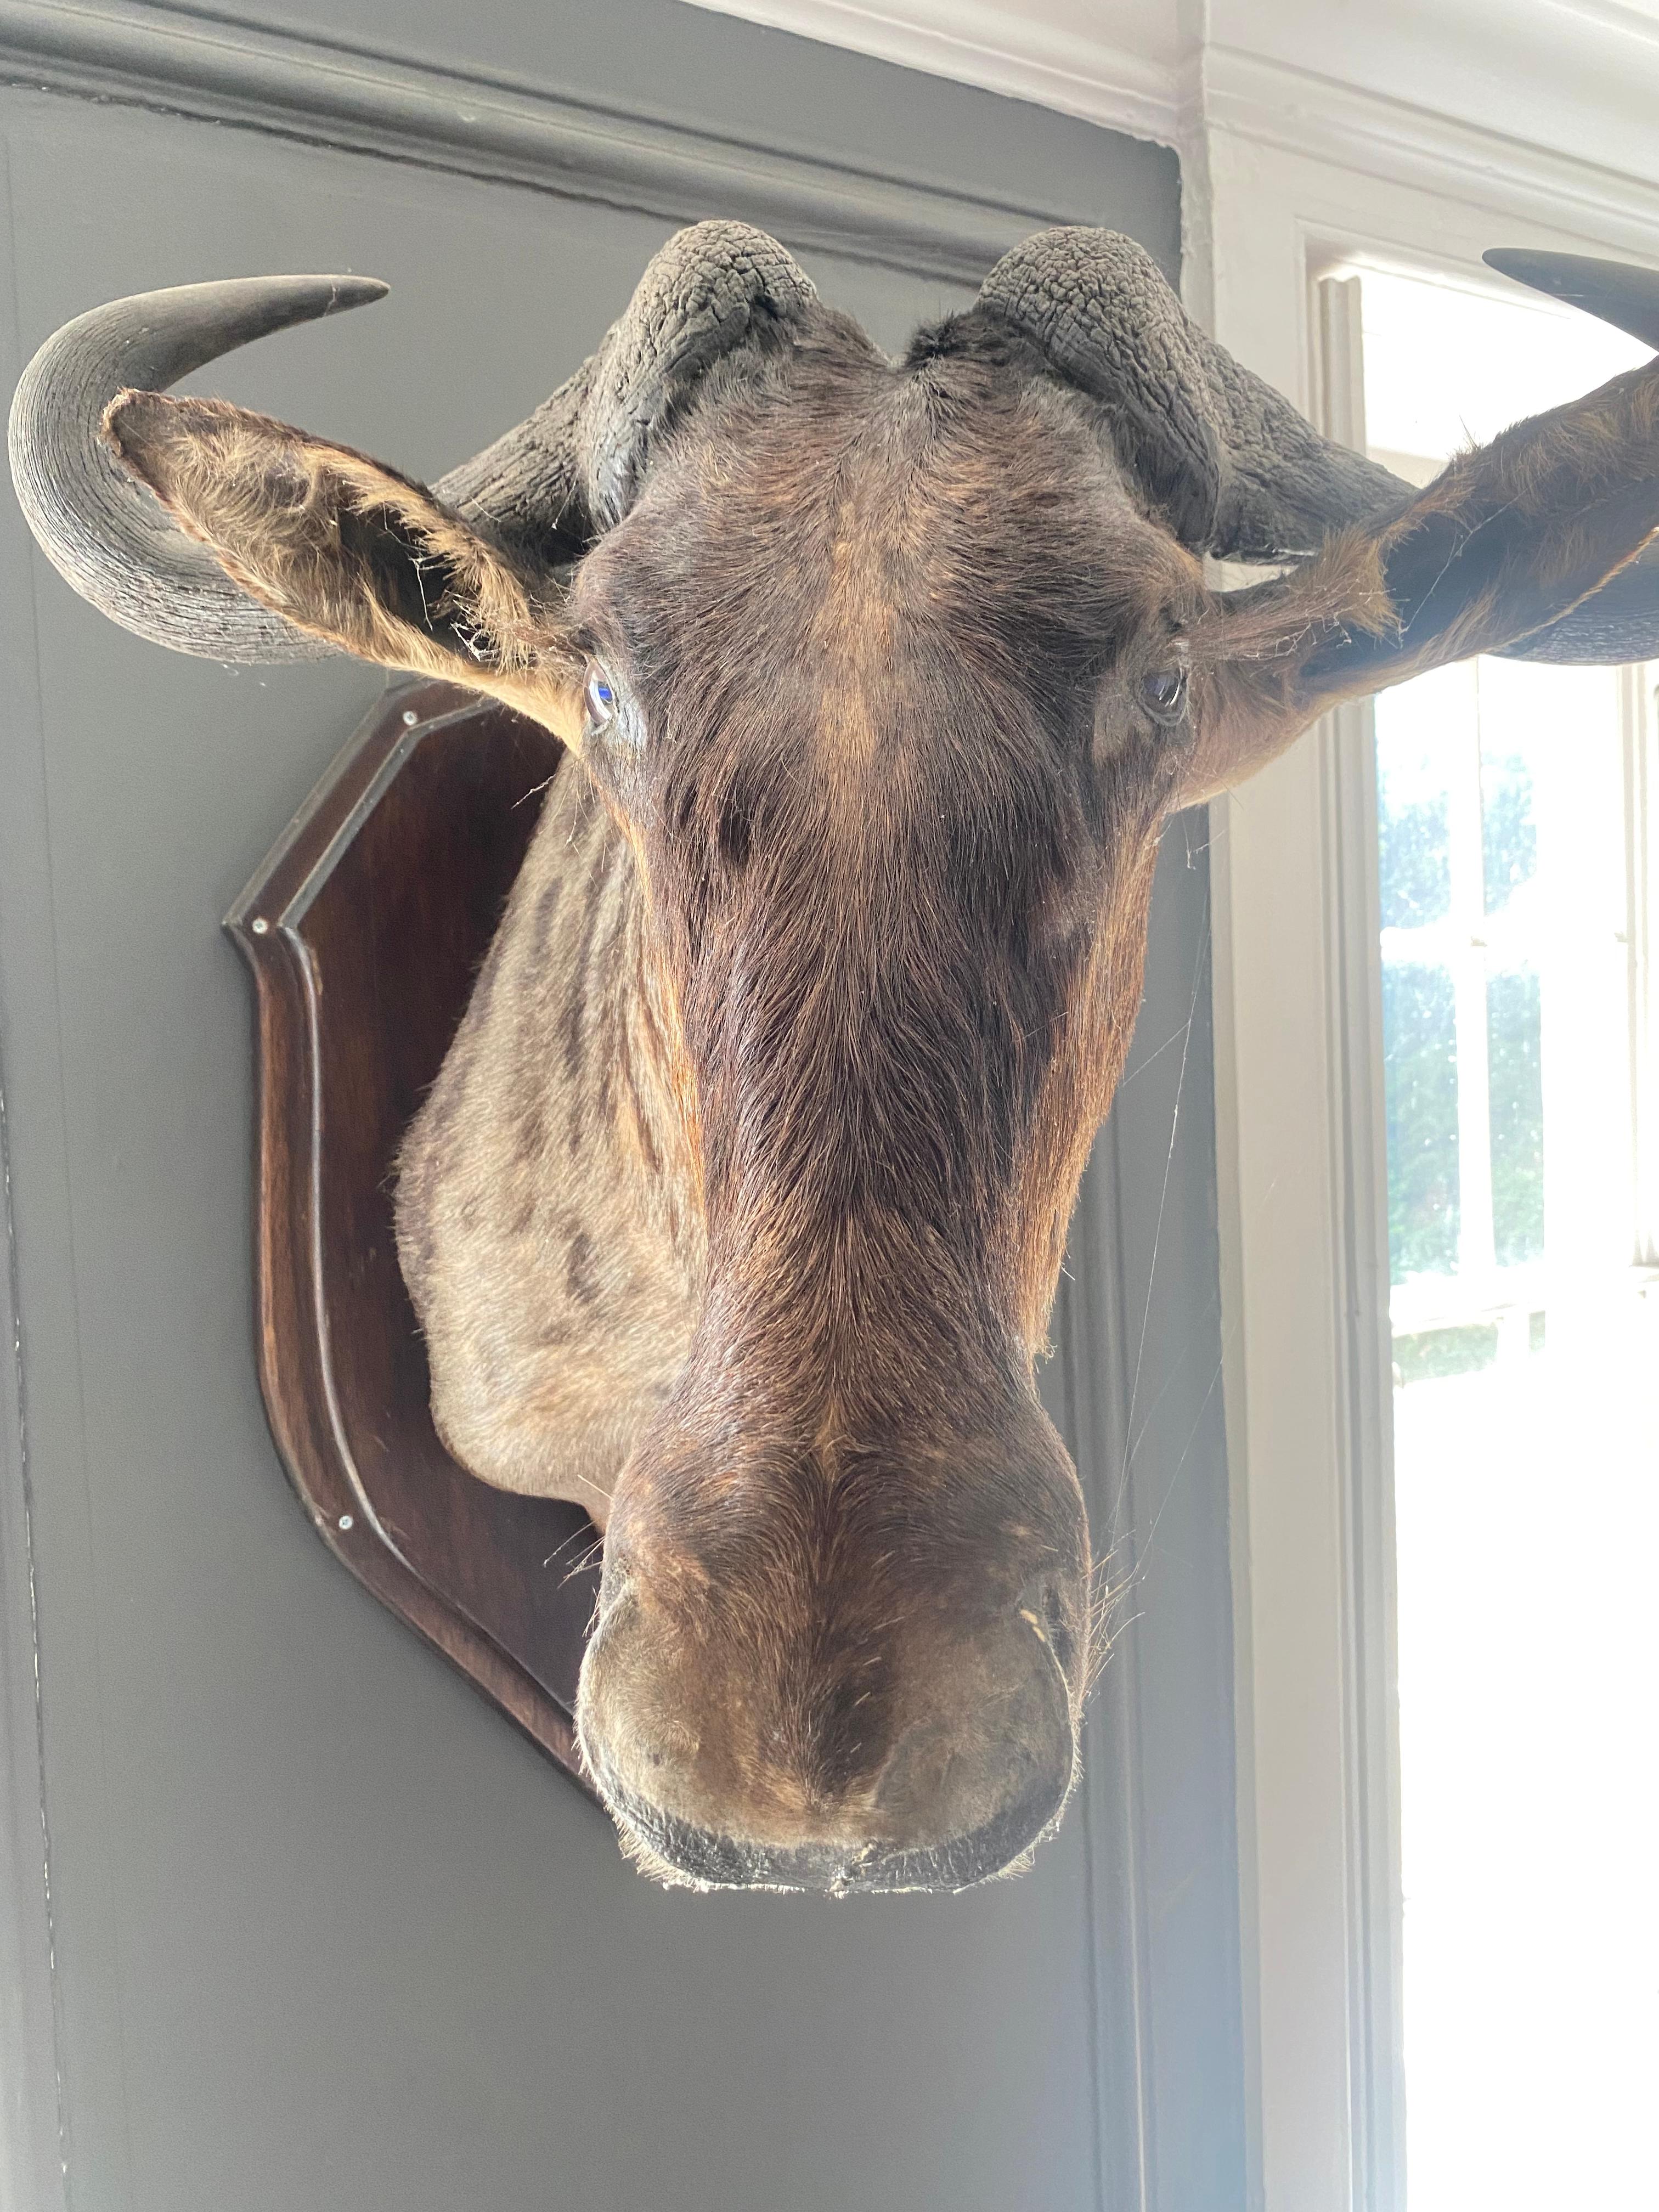 A wonderful and very large mounted Gnu trophy head - dated 1891 Zululand.